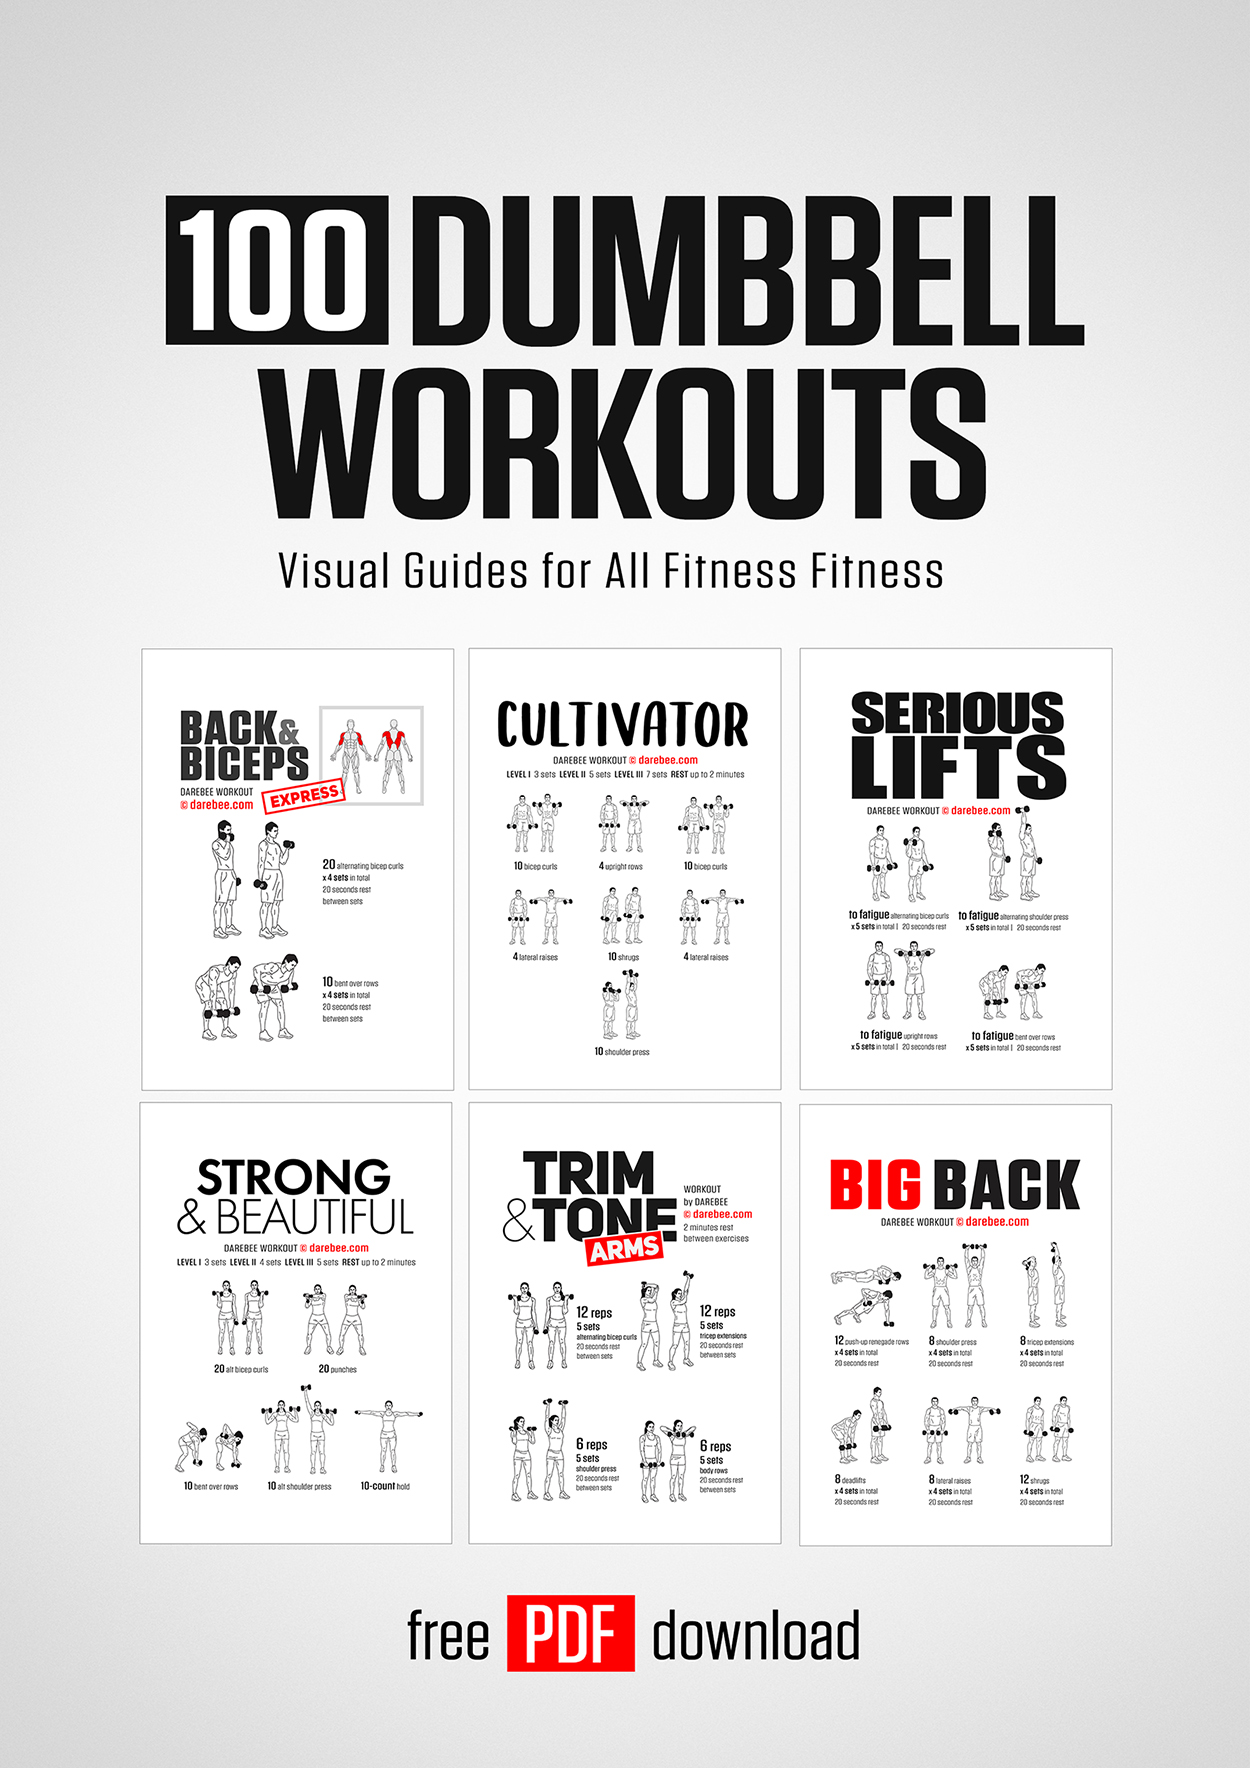 100 Dumbbell Workouts is a field-tested book by DAREBEE that gives you, in one place, 100 dumbbell workouts you can do to help you develop amazing strength at home.